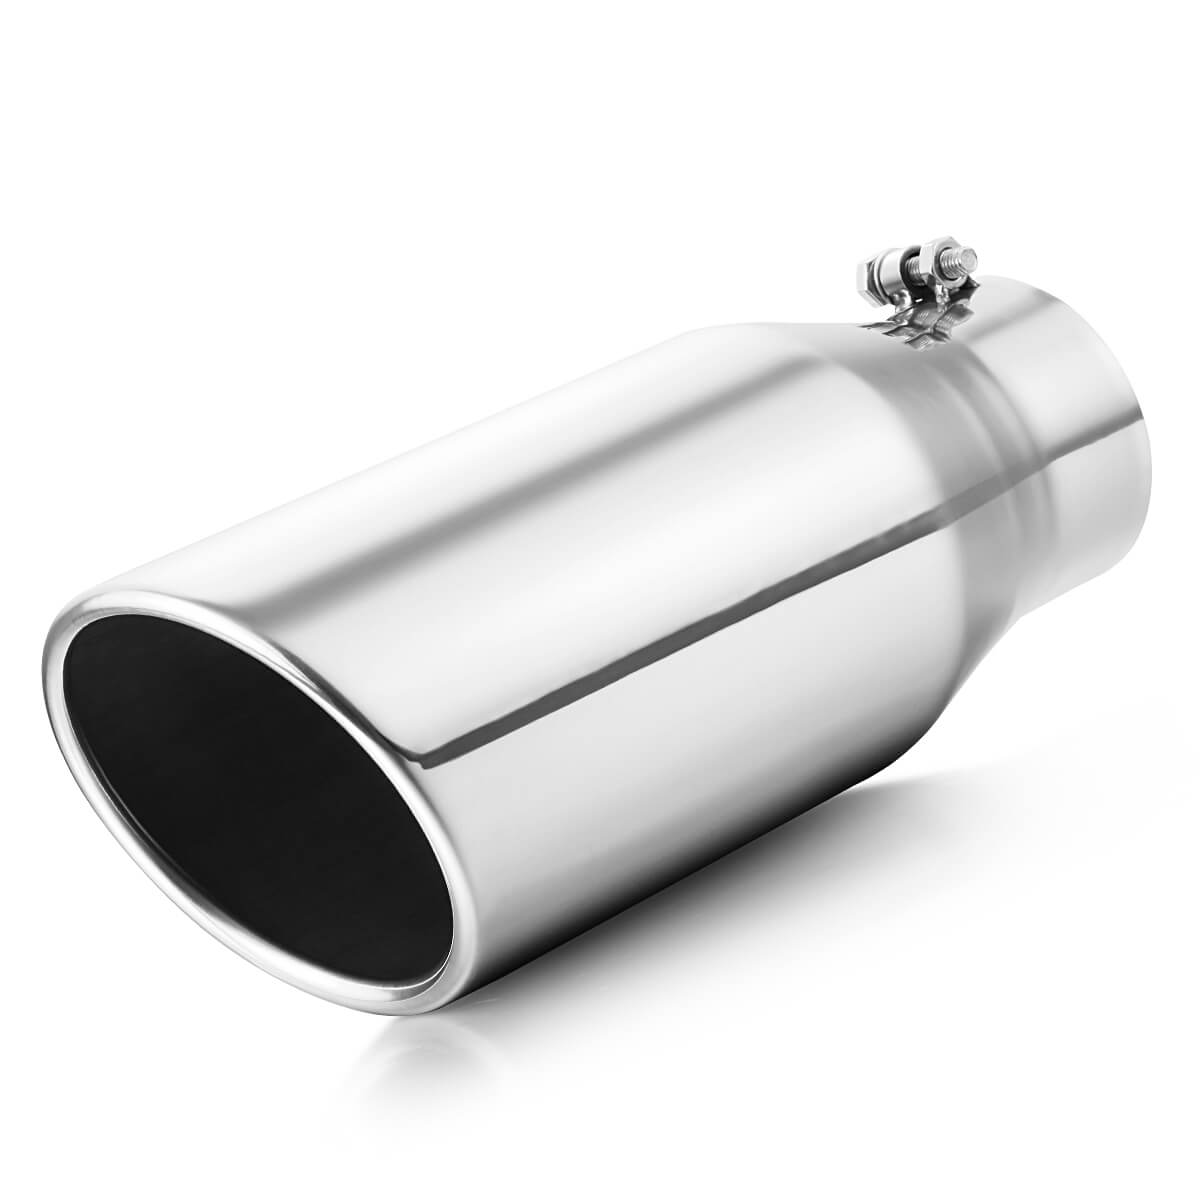 4 inlet to 6 outlet Exhaust TIP，4 x 6 x 15 in Black Stainless Steel Exhaust Tip Bolt On Design